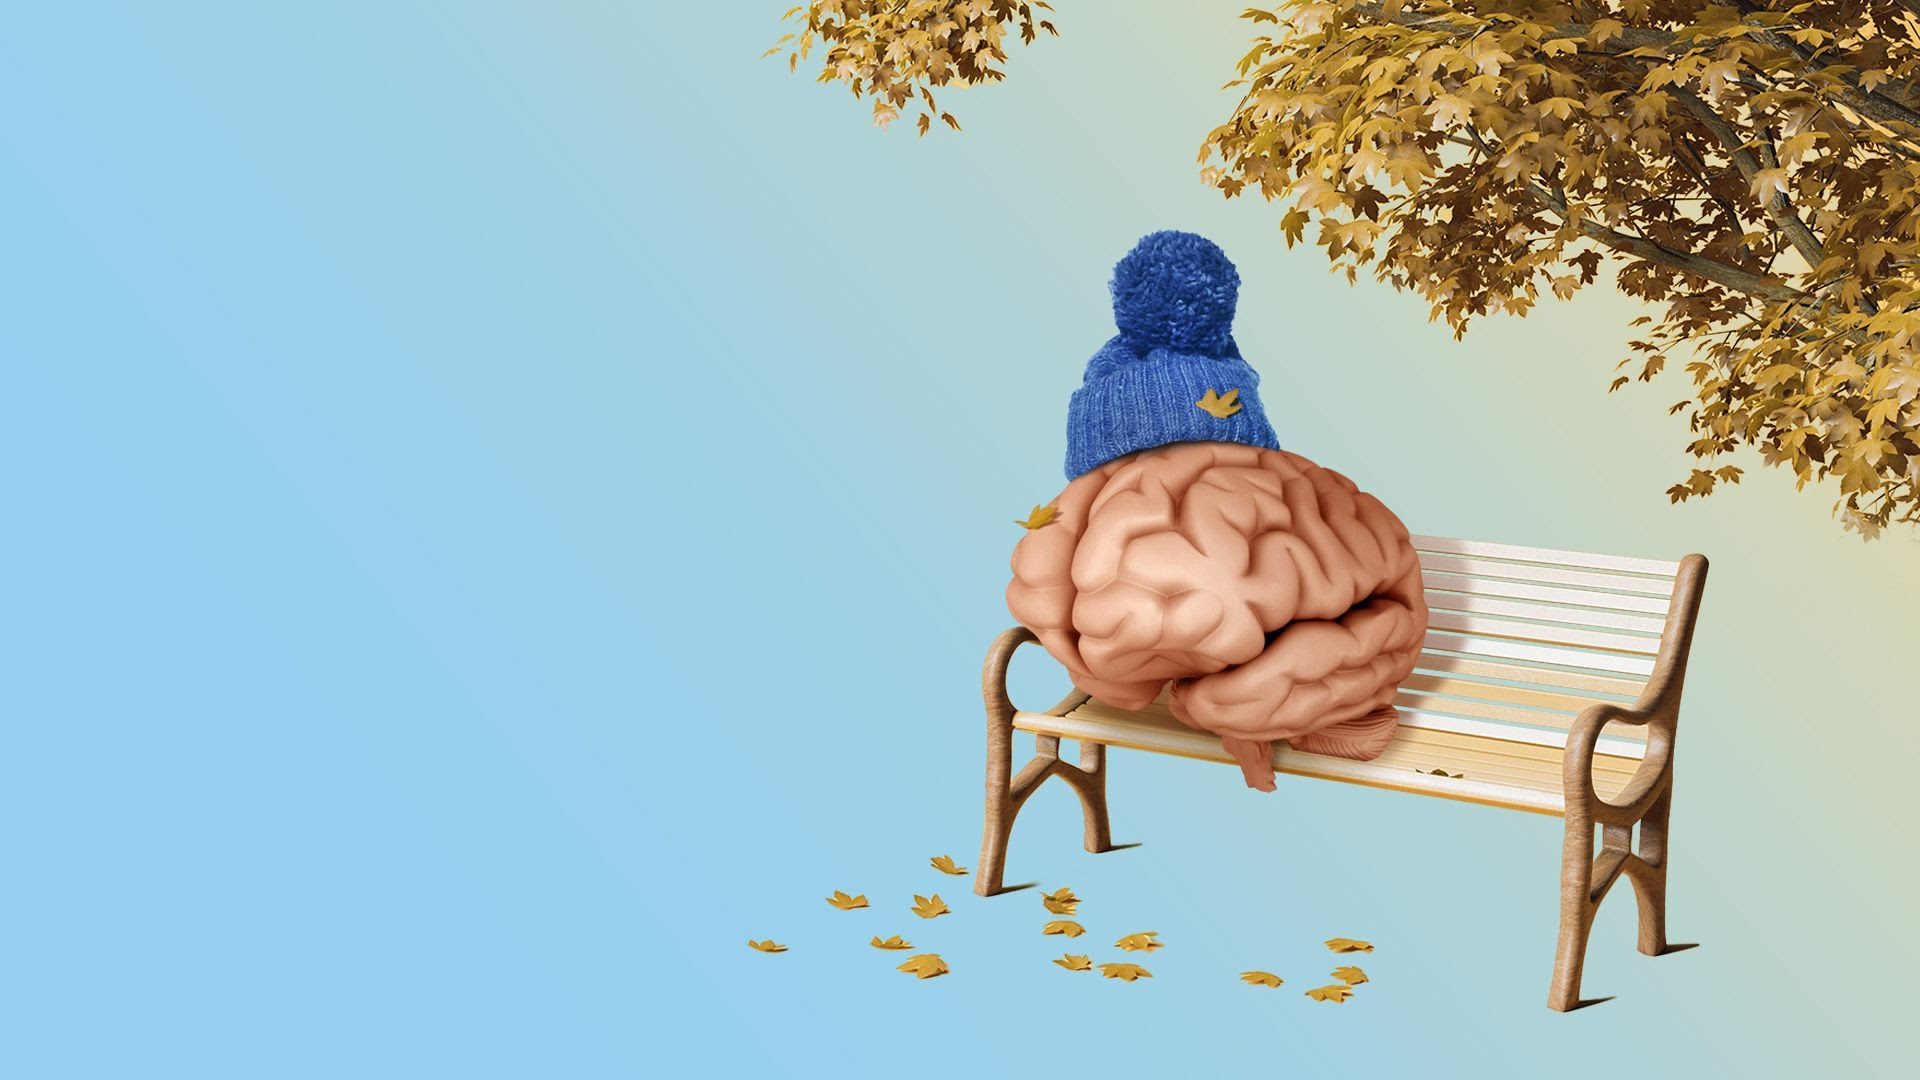 Illustration of a brain wearing a winter hat sitting on a park bench under a tree with leaves falling